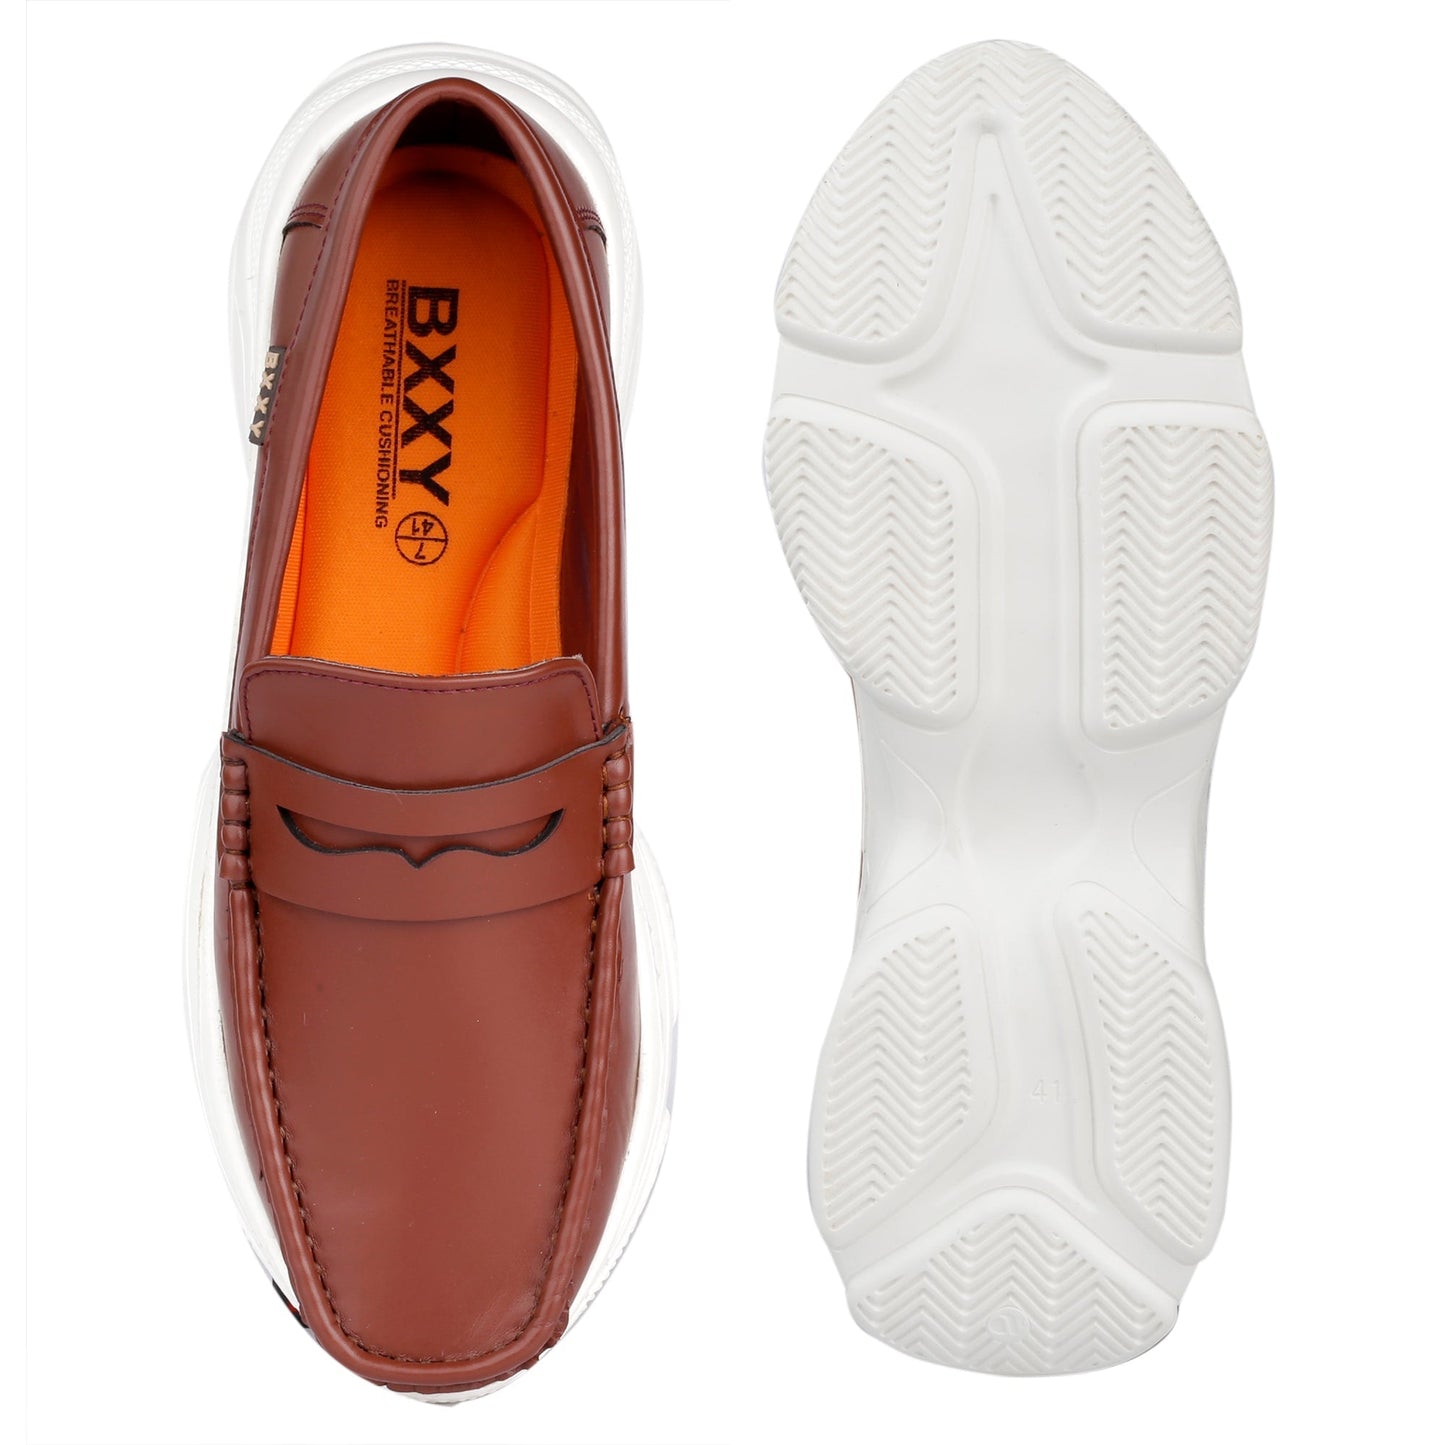 Bxxy's Vegan Leather Trendiest Checker Loafers for Men